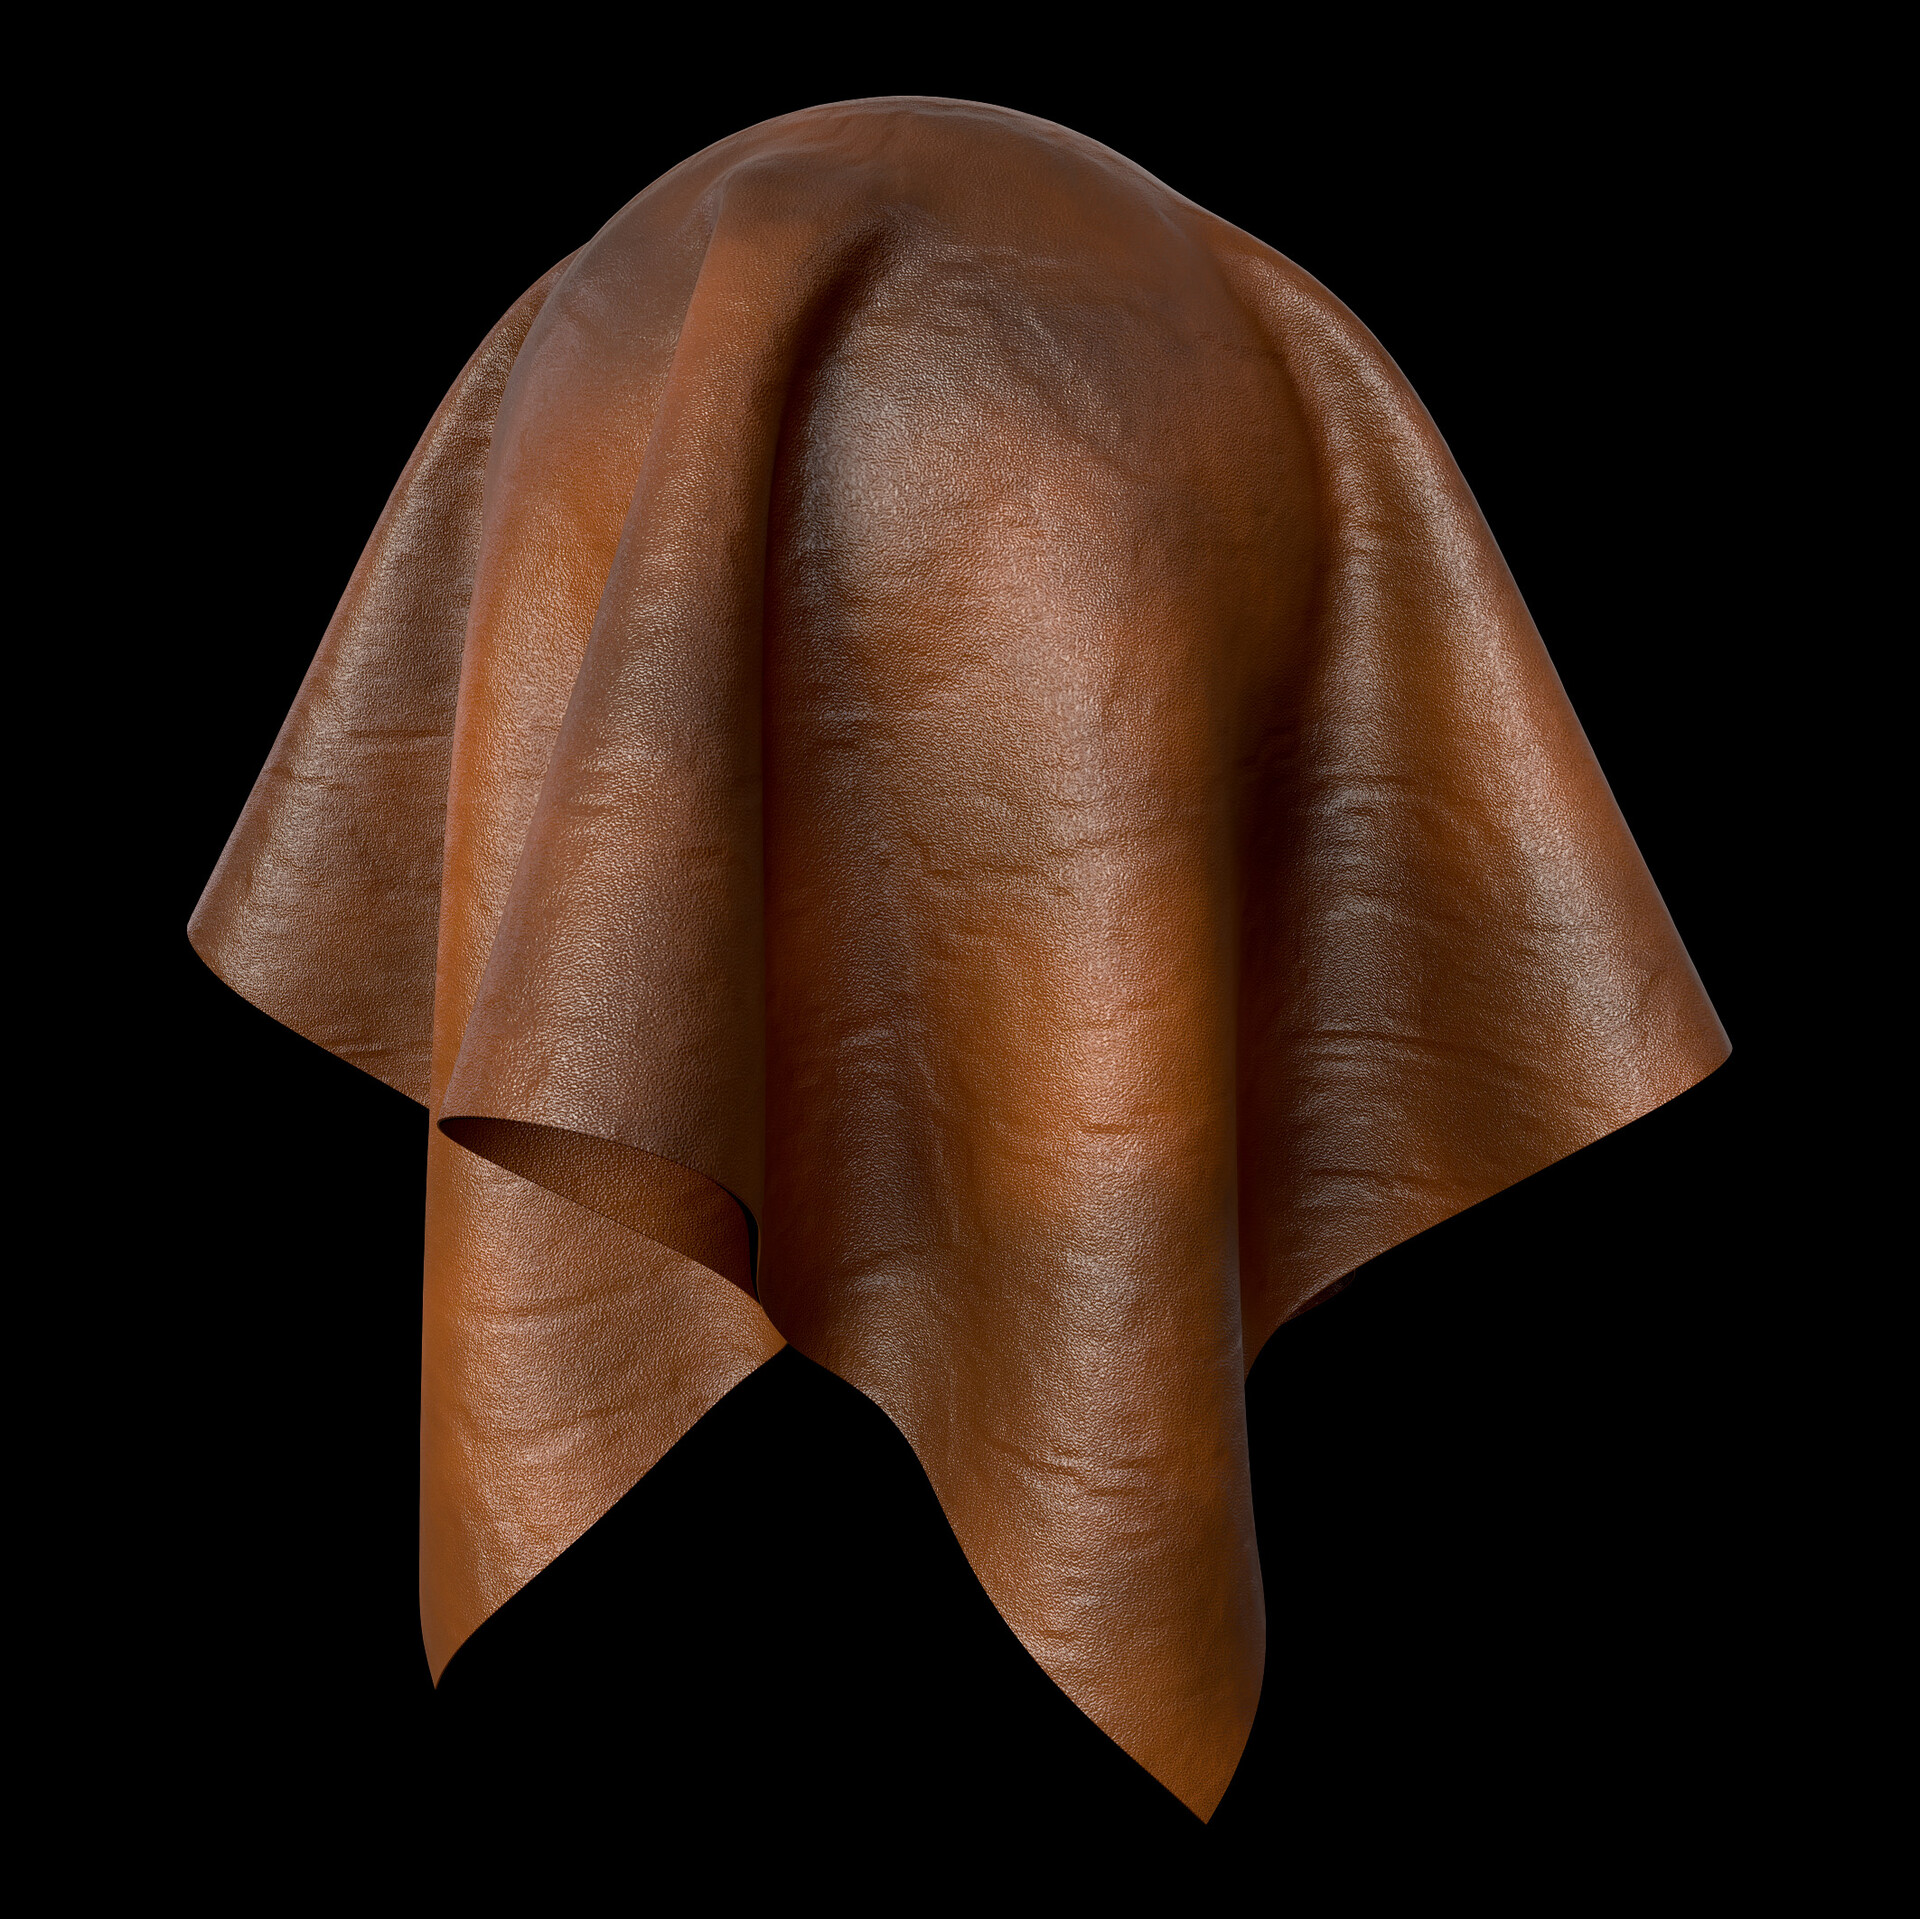 ArtStation - Leather Materials 17- Stitched leather, Pbr 4k Seamless